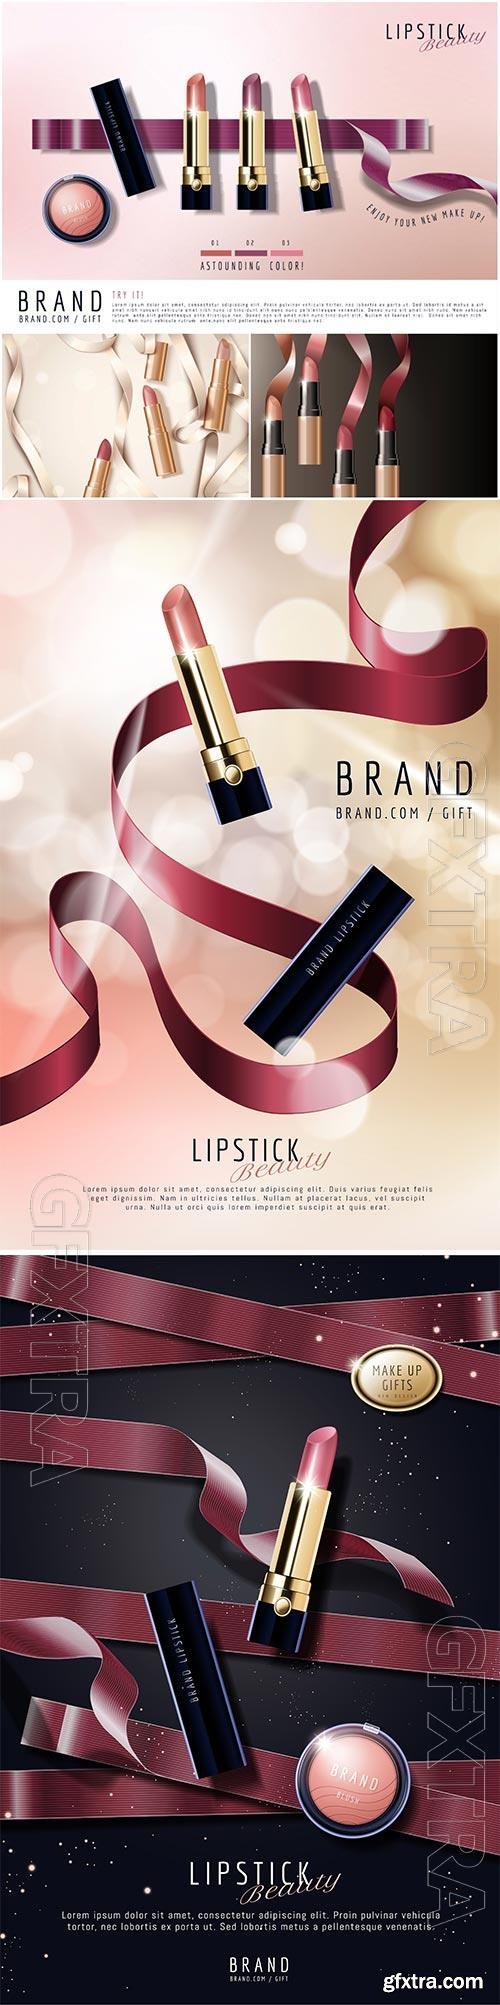 Lipstick advertising posters in vector